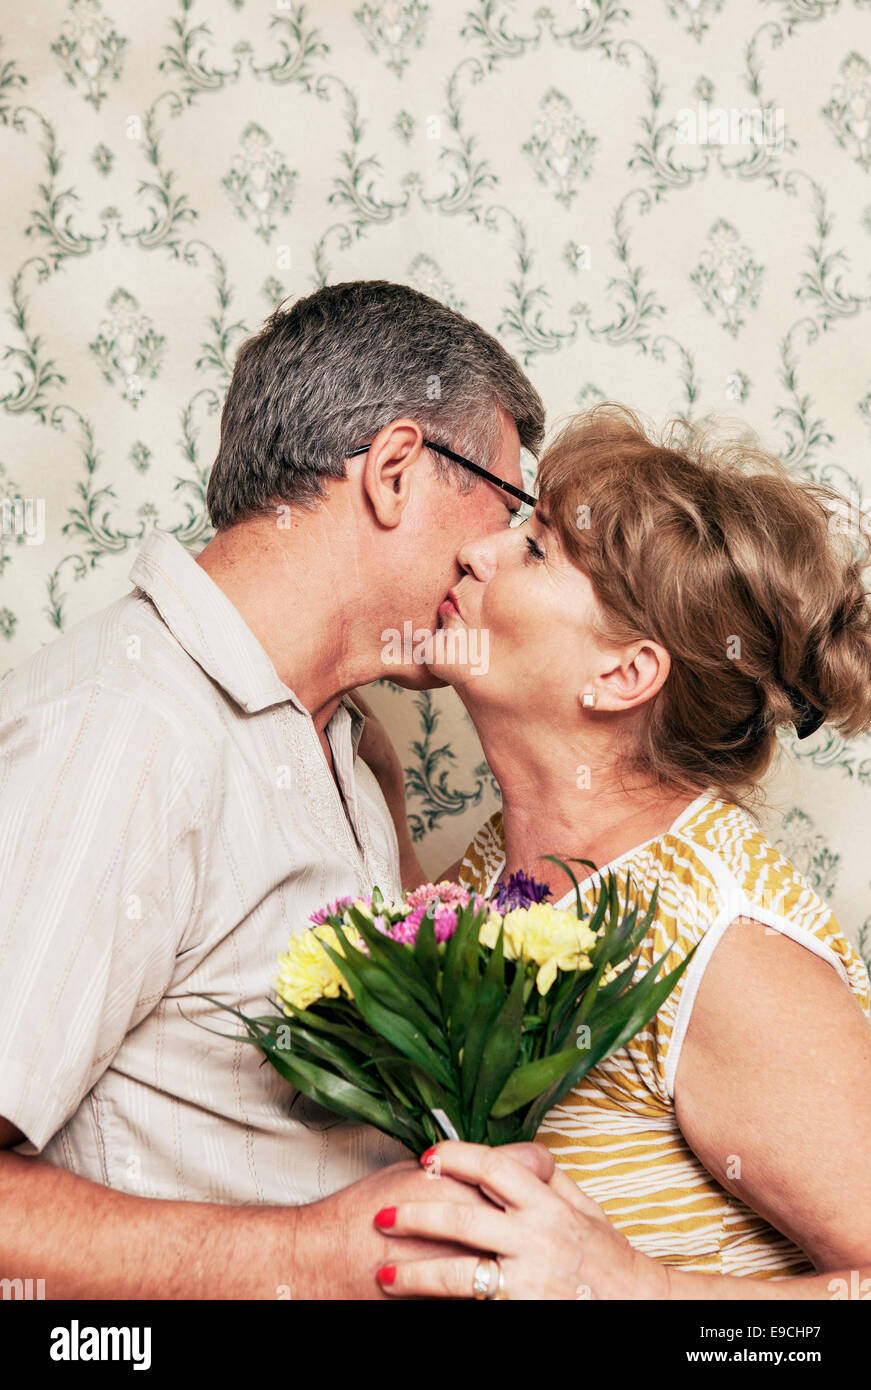 Adult couple kissing each other and holding bouquet of flowers Stock Photo